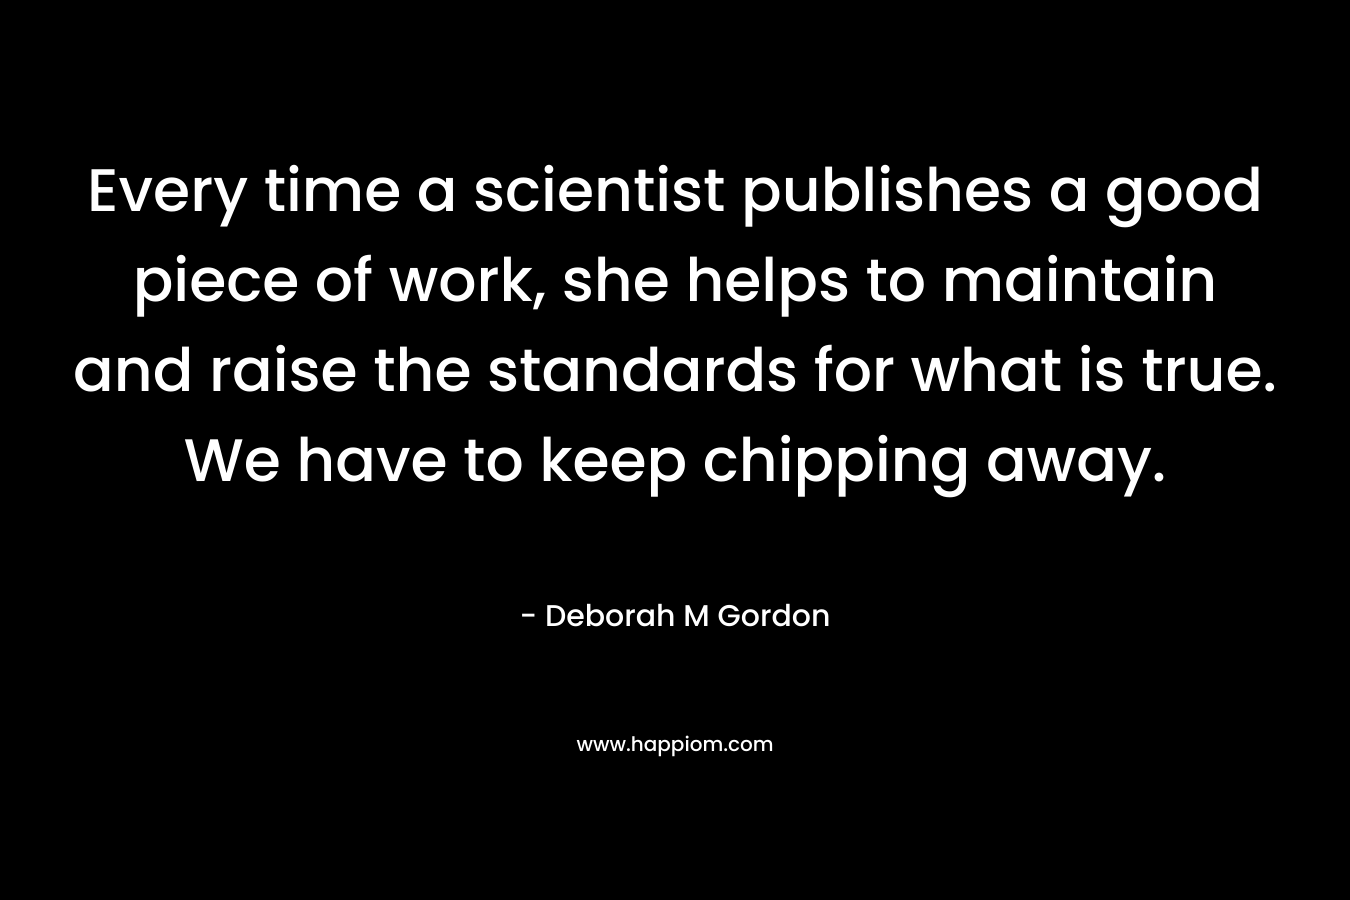 Every time a scientist publishes a good piece of work, she helps to maintain and raise the standards for what is true. We have to keep chipping away.